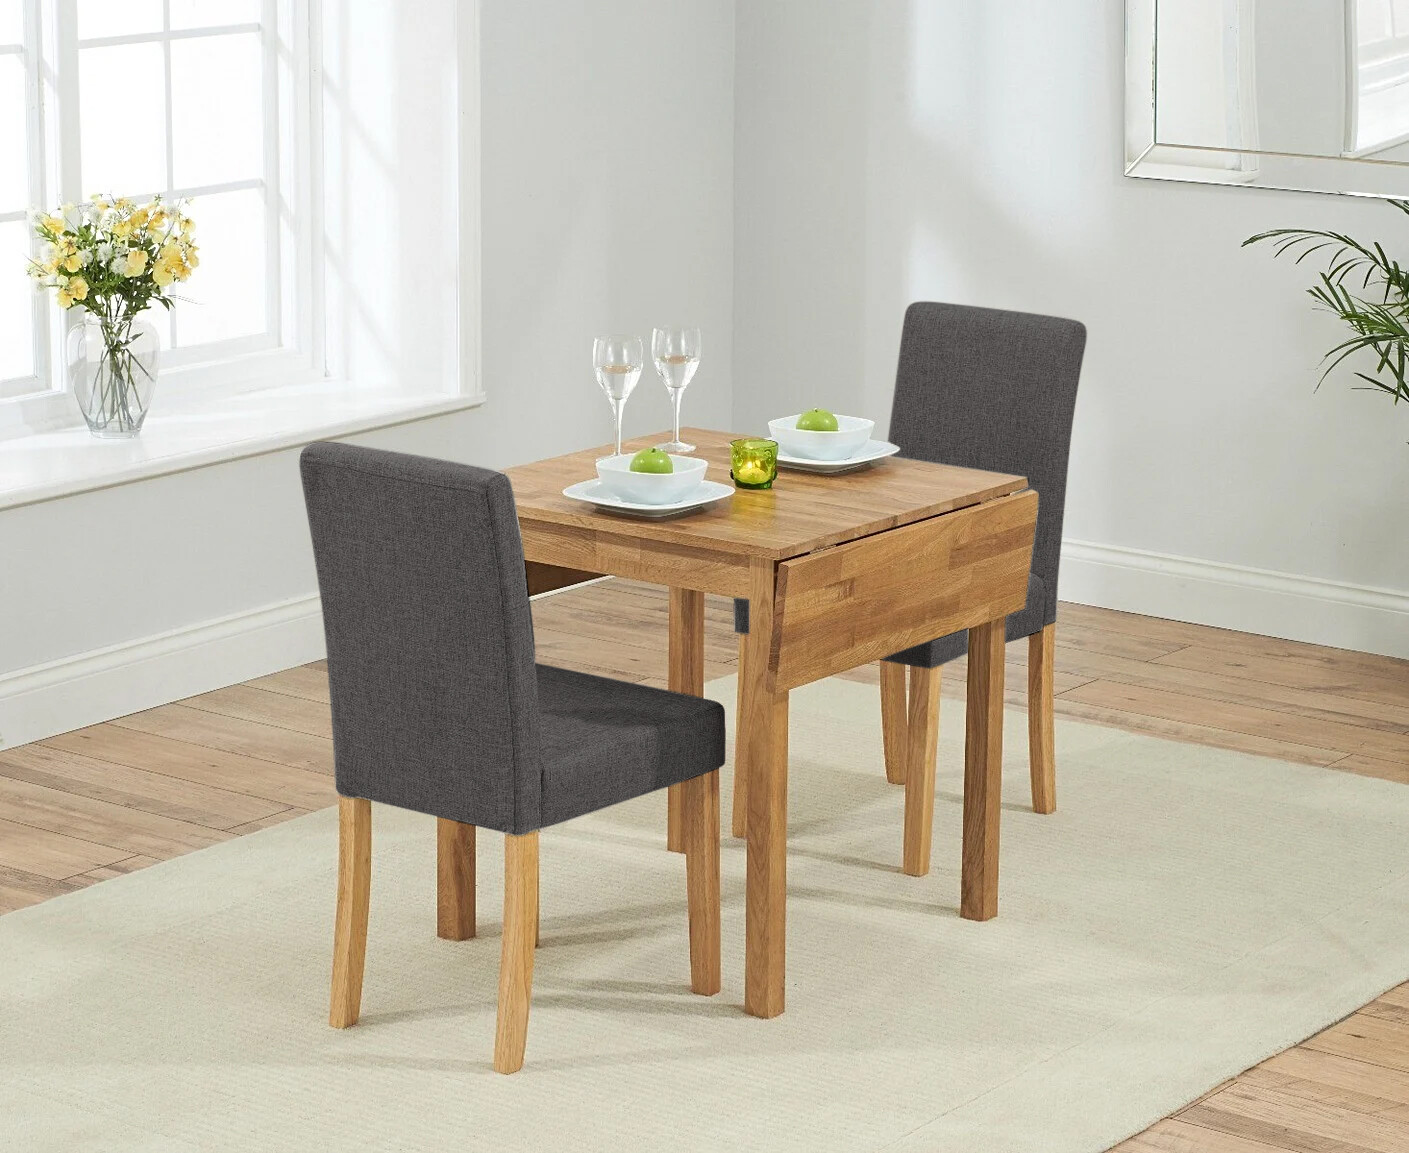 Photo 2 of Extending york 70cm solid oak drop leaf dining table with 2 natural lila chairs